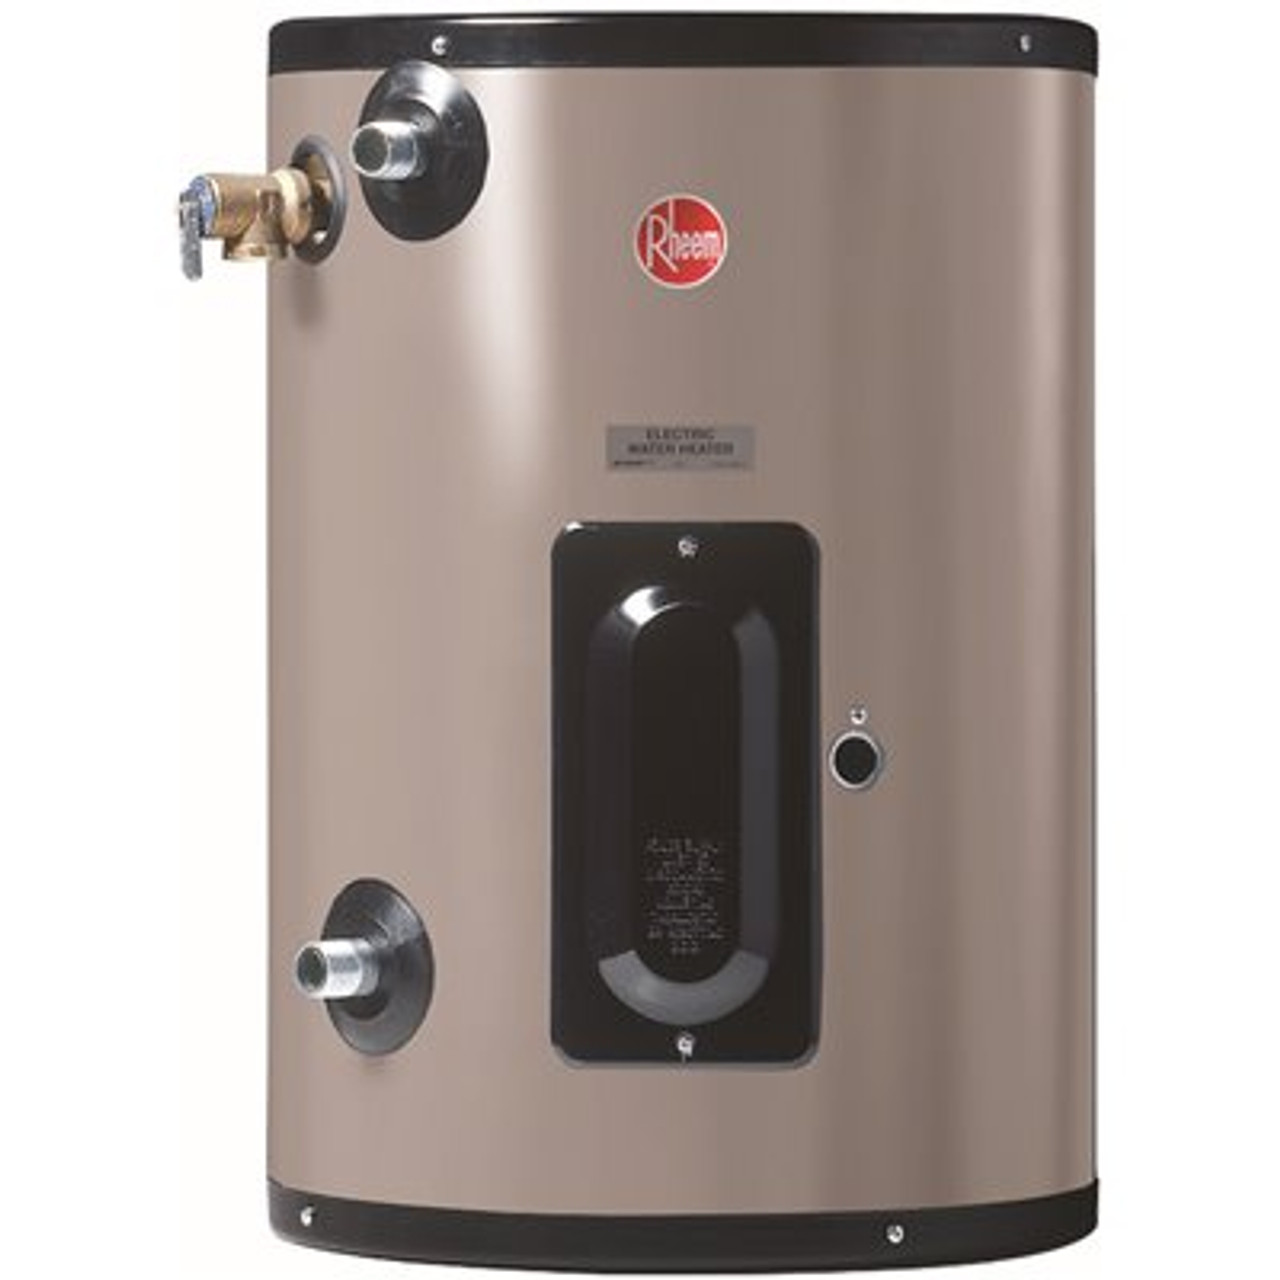 Rheem Commercial Point of Use 20 Gal. 120-Volt 2kw 1 Phase Electric Tank Water Heater